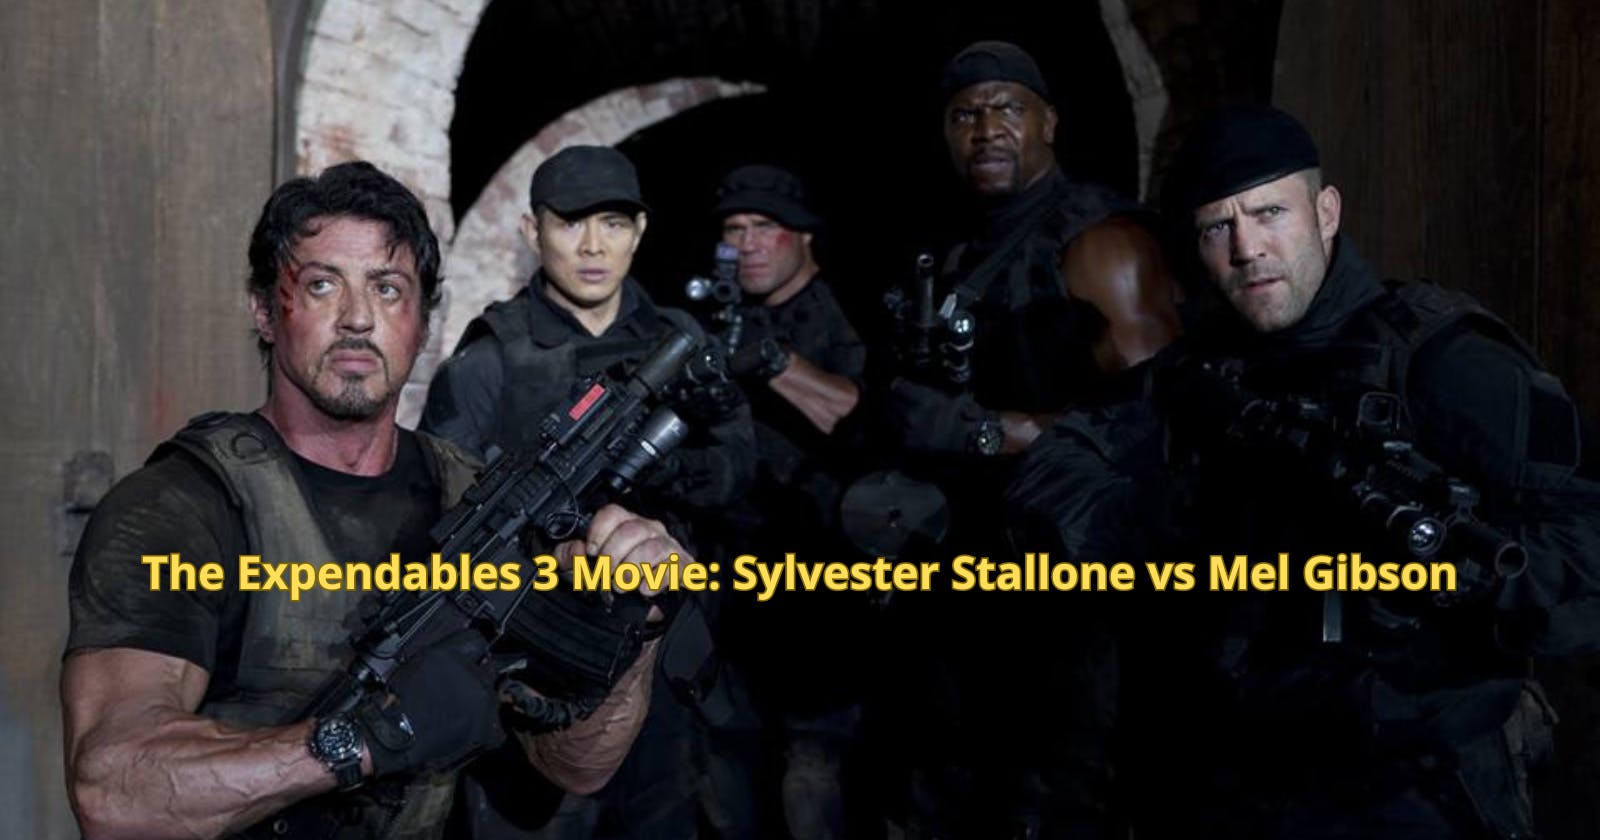 The Expendables 3 Movie: Sylvester Stallone vs Mel Gibson